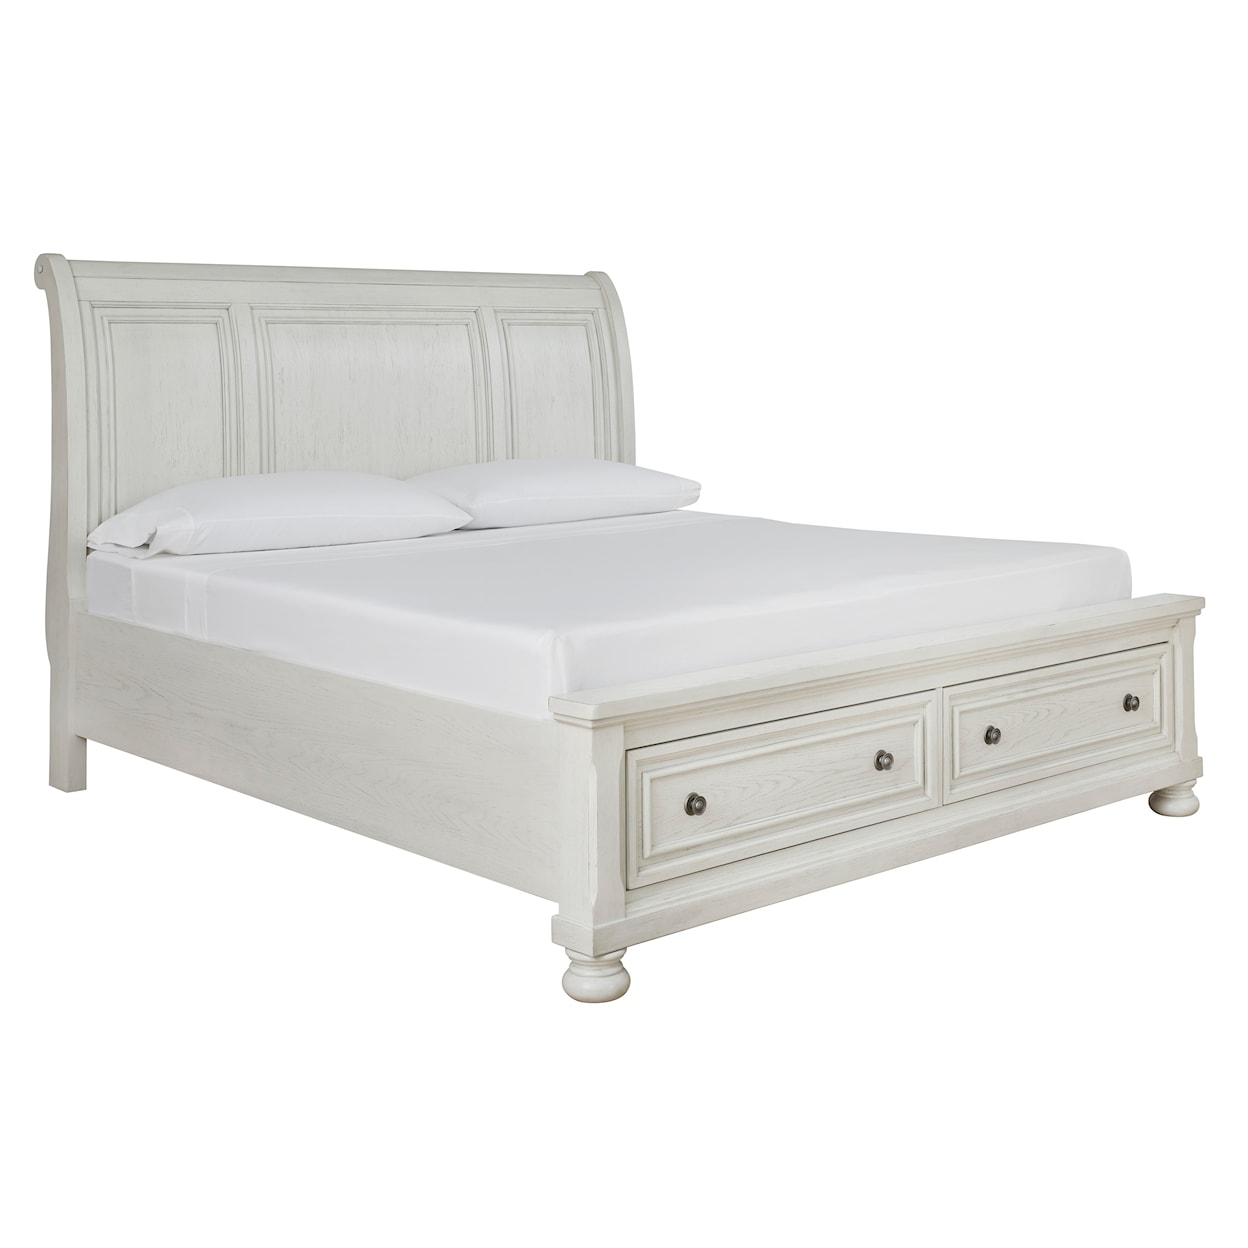 Signature Design by Ashley Robbinsdale Queen Sleigh Bed with Storage